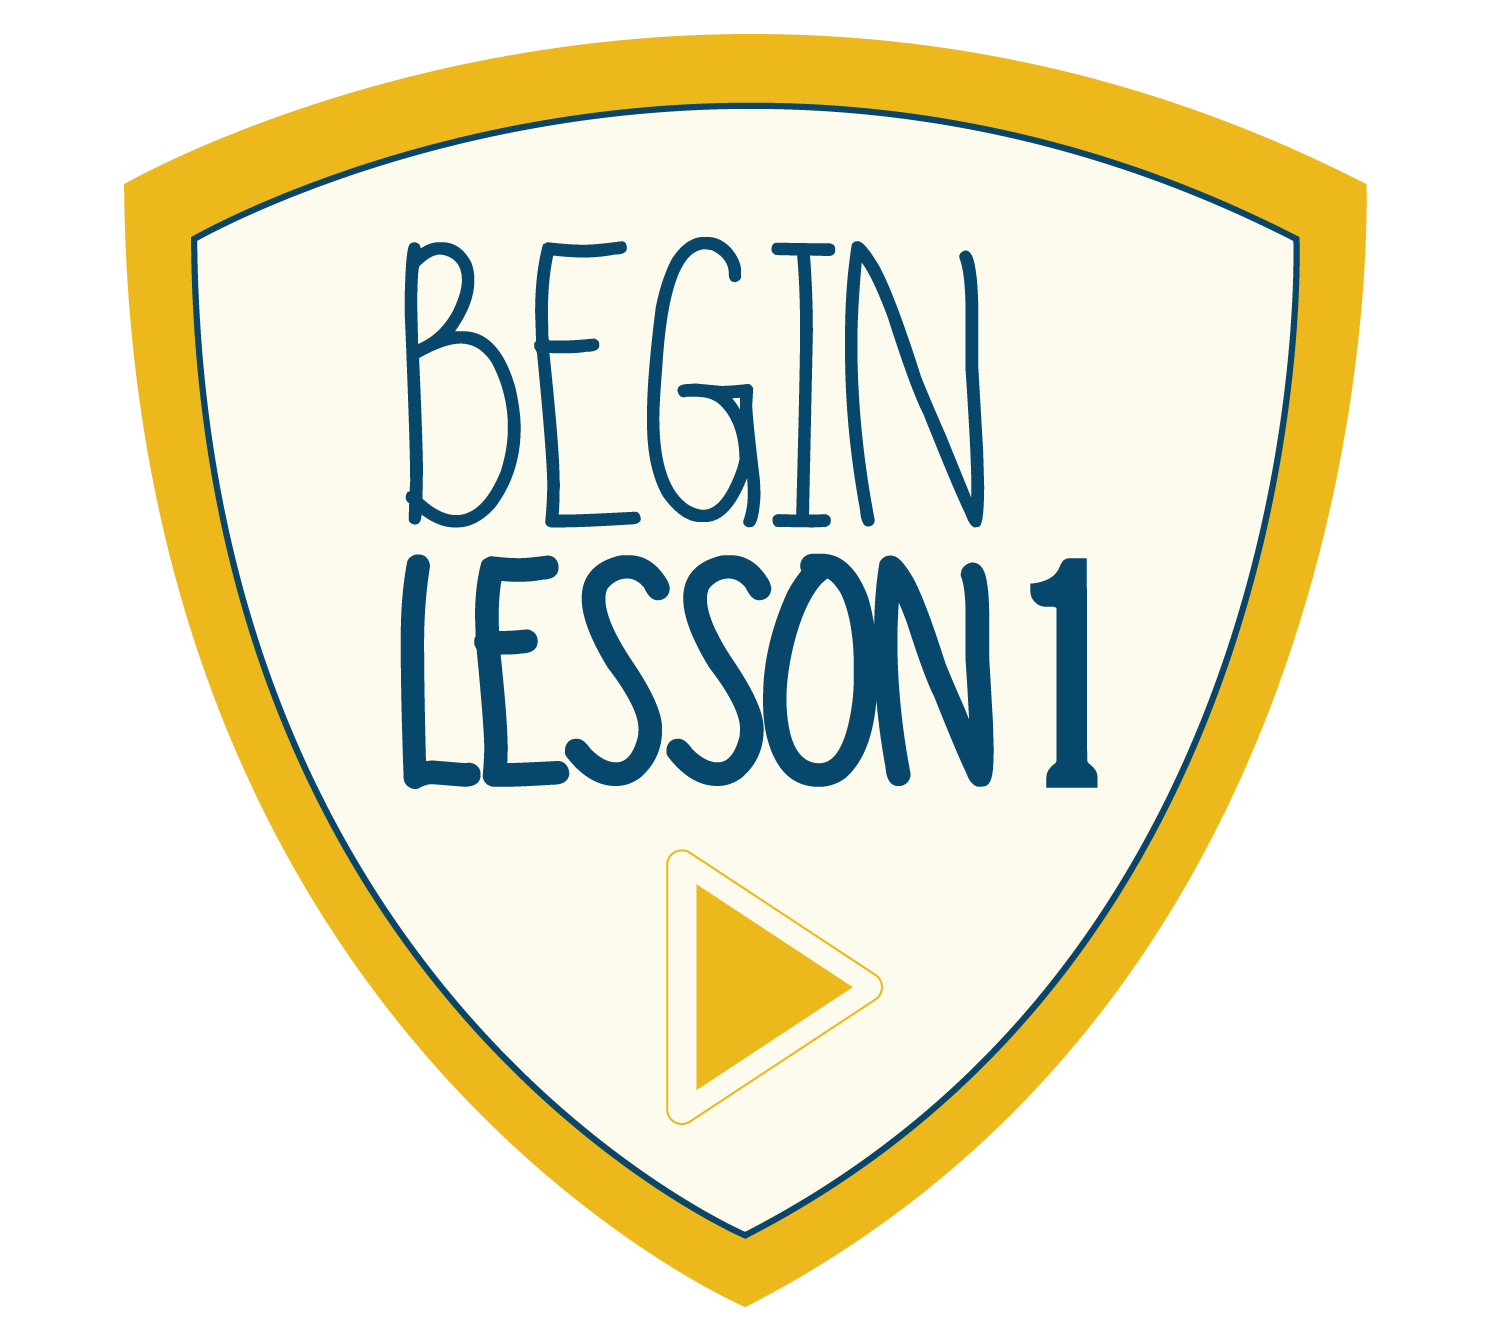 Begin lesson one